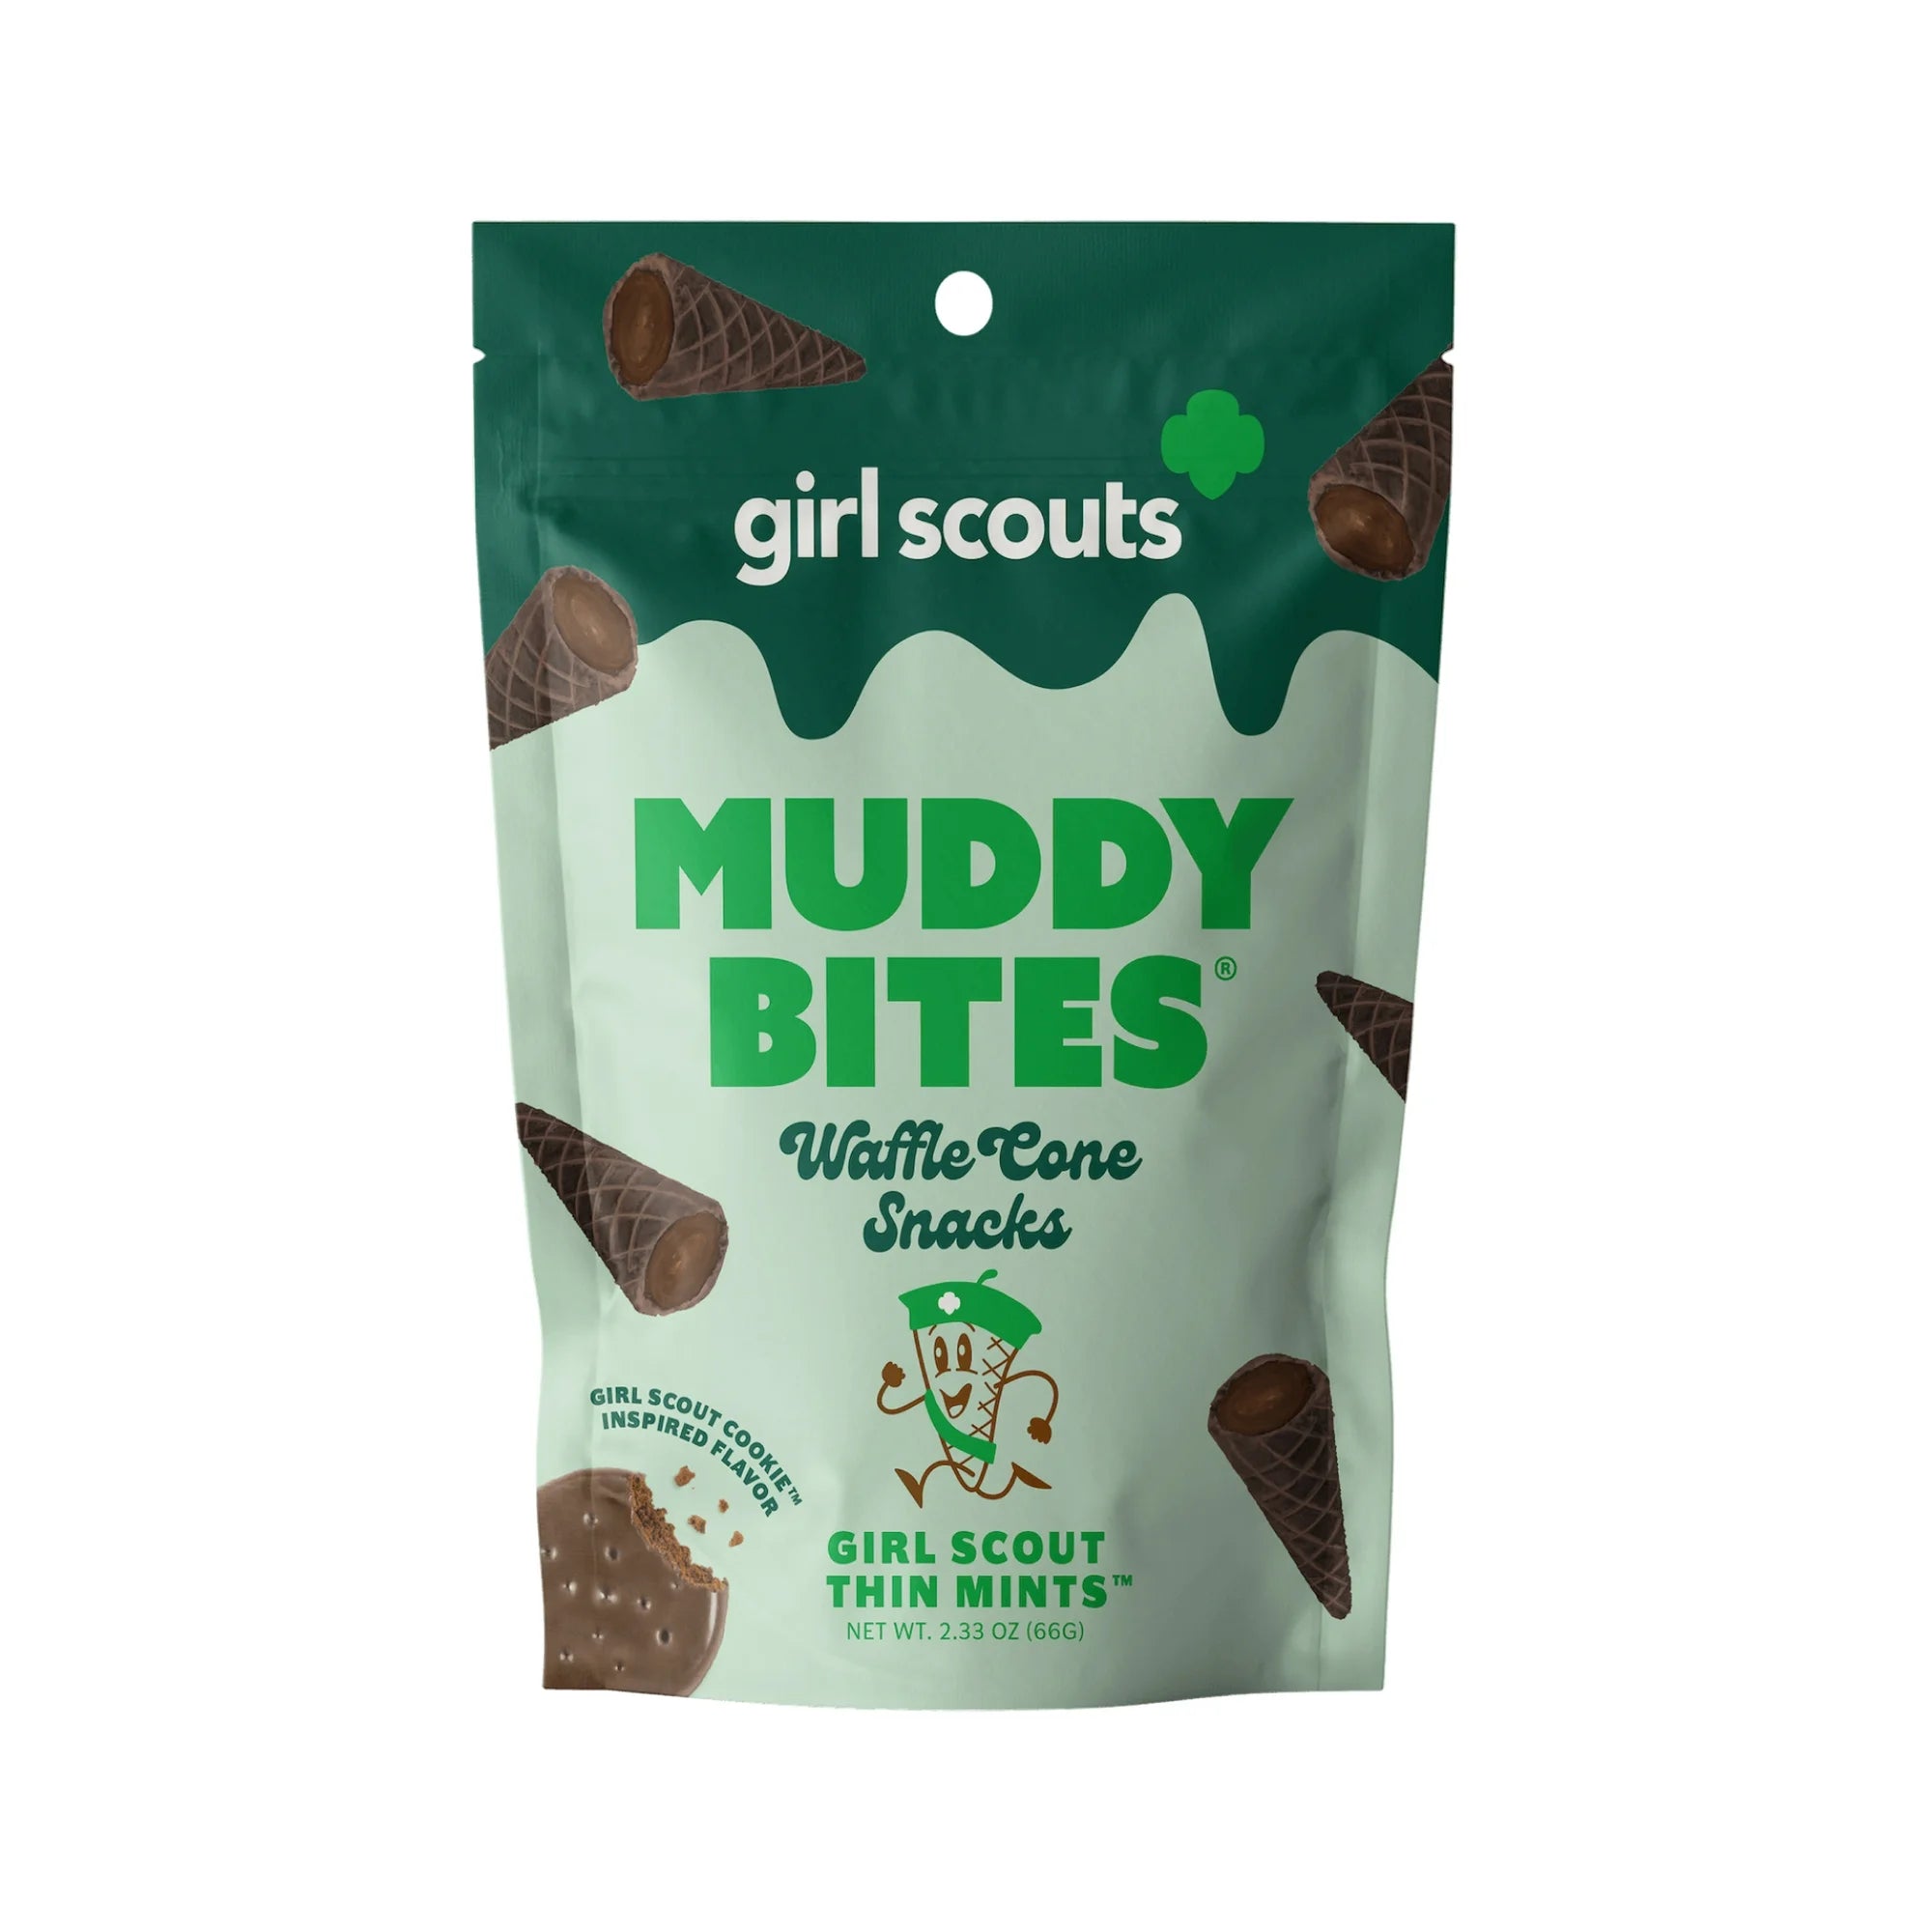 Muddy Bites Girl Scout Thin Mints cone (66g)